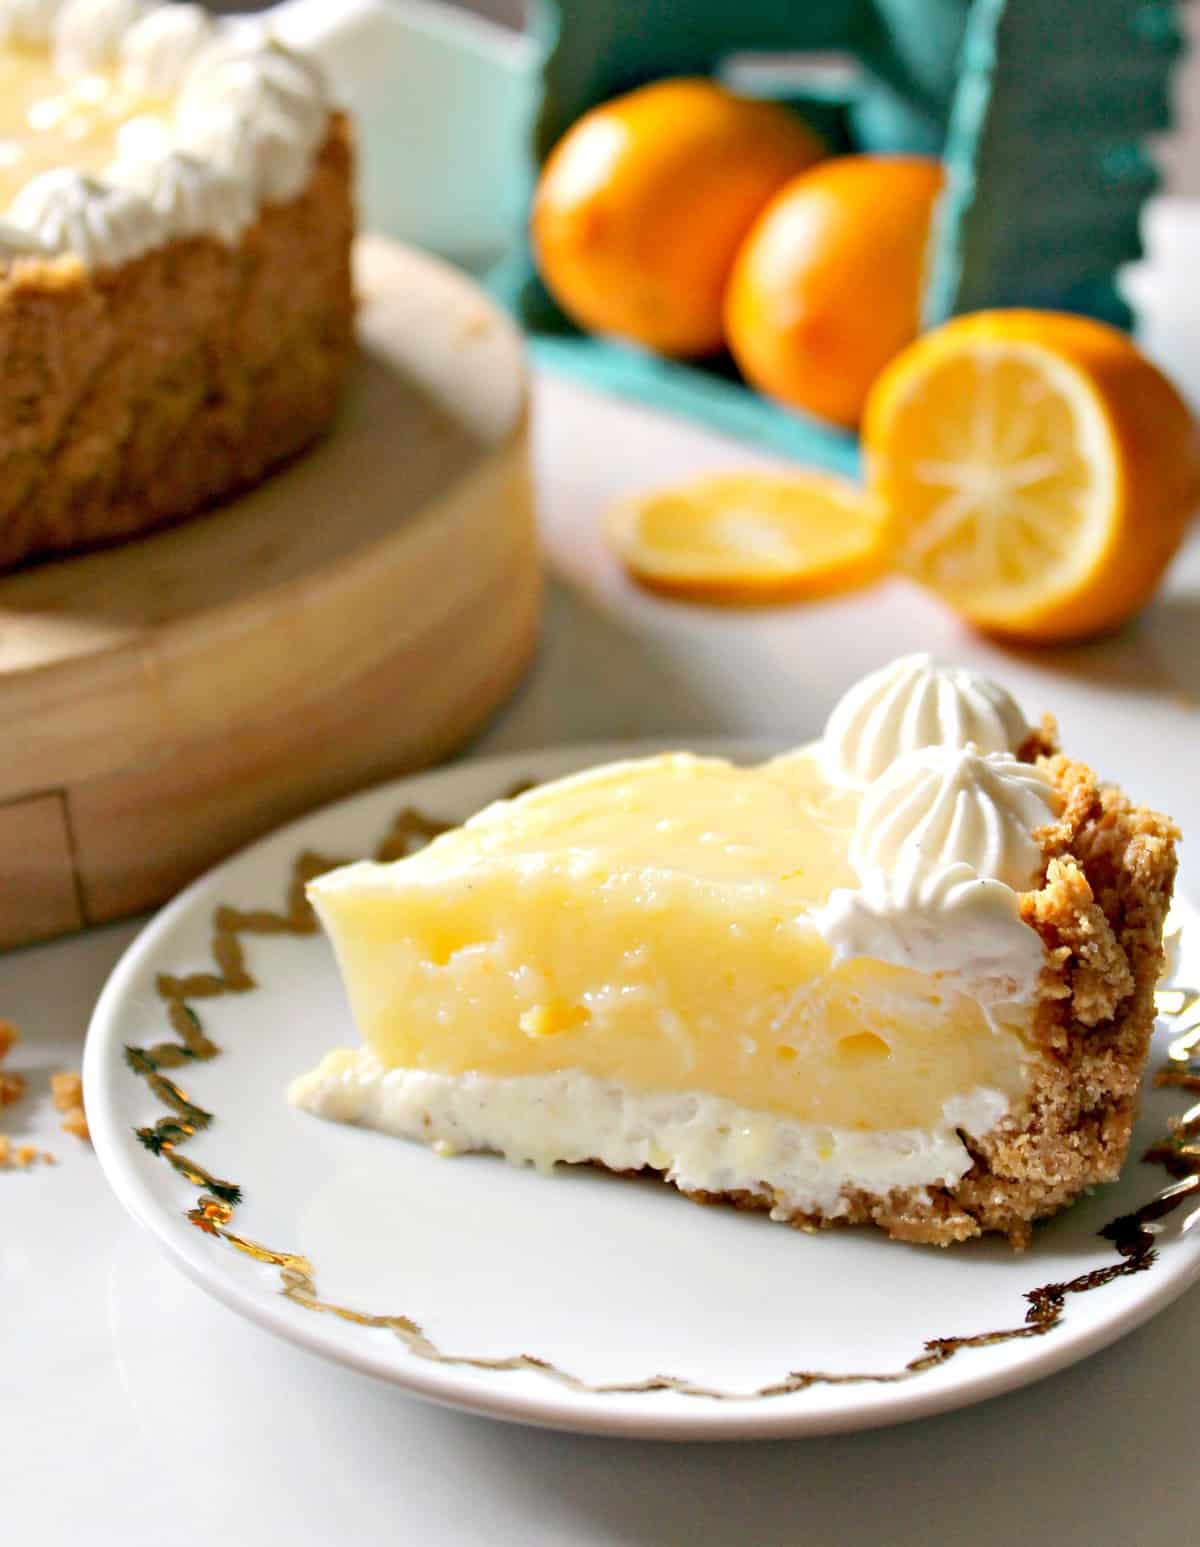 Meyer Lemon & Yogurt Cream Pie! If you're looking for Meyer Lemon recipes, look no further! This luscious pie is the perfect place to let those sweet-tart Meyer lemons shine. A smooth yogurt cream base and topping balances the flavors wonderfully.